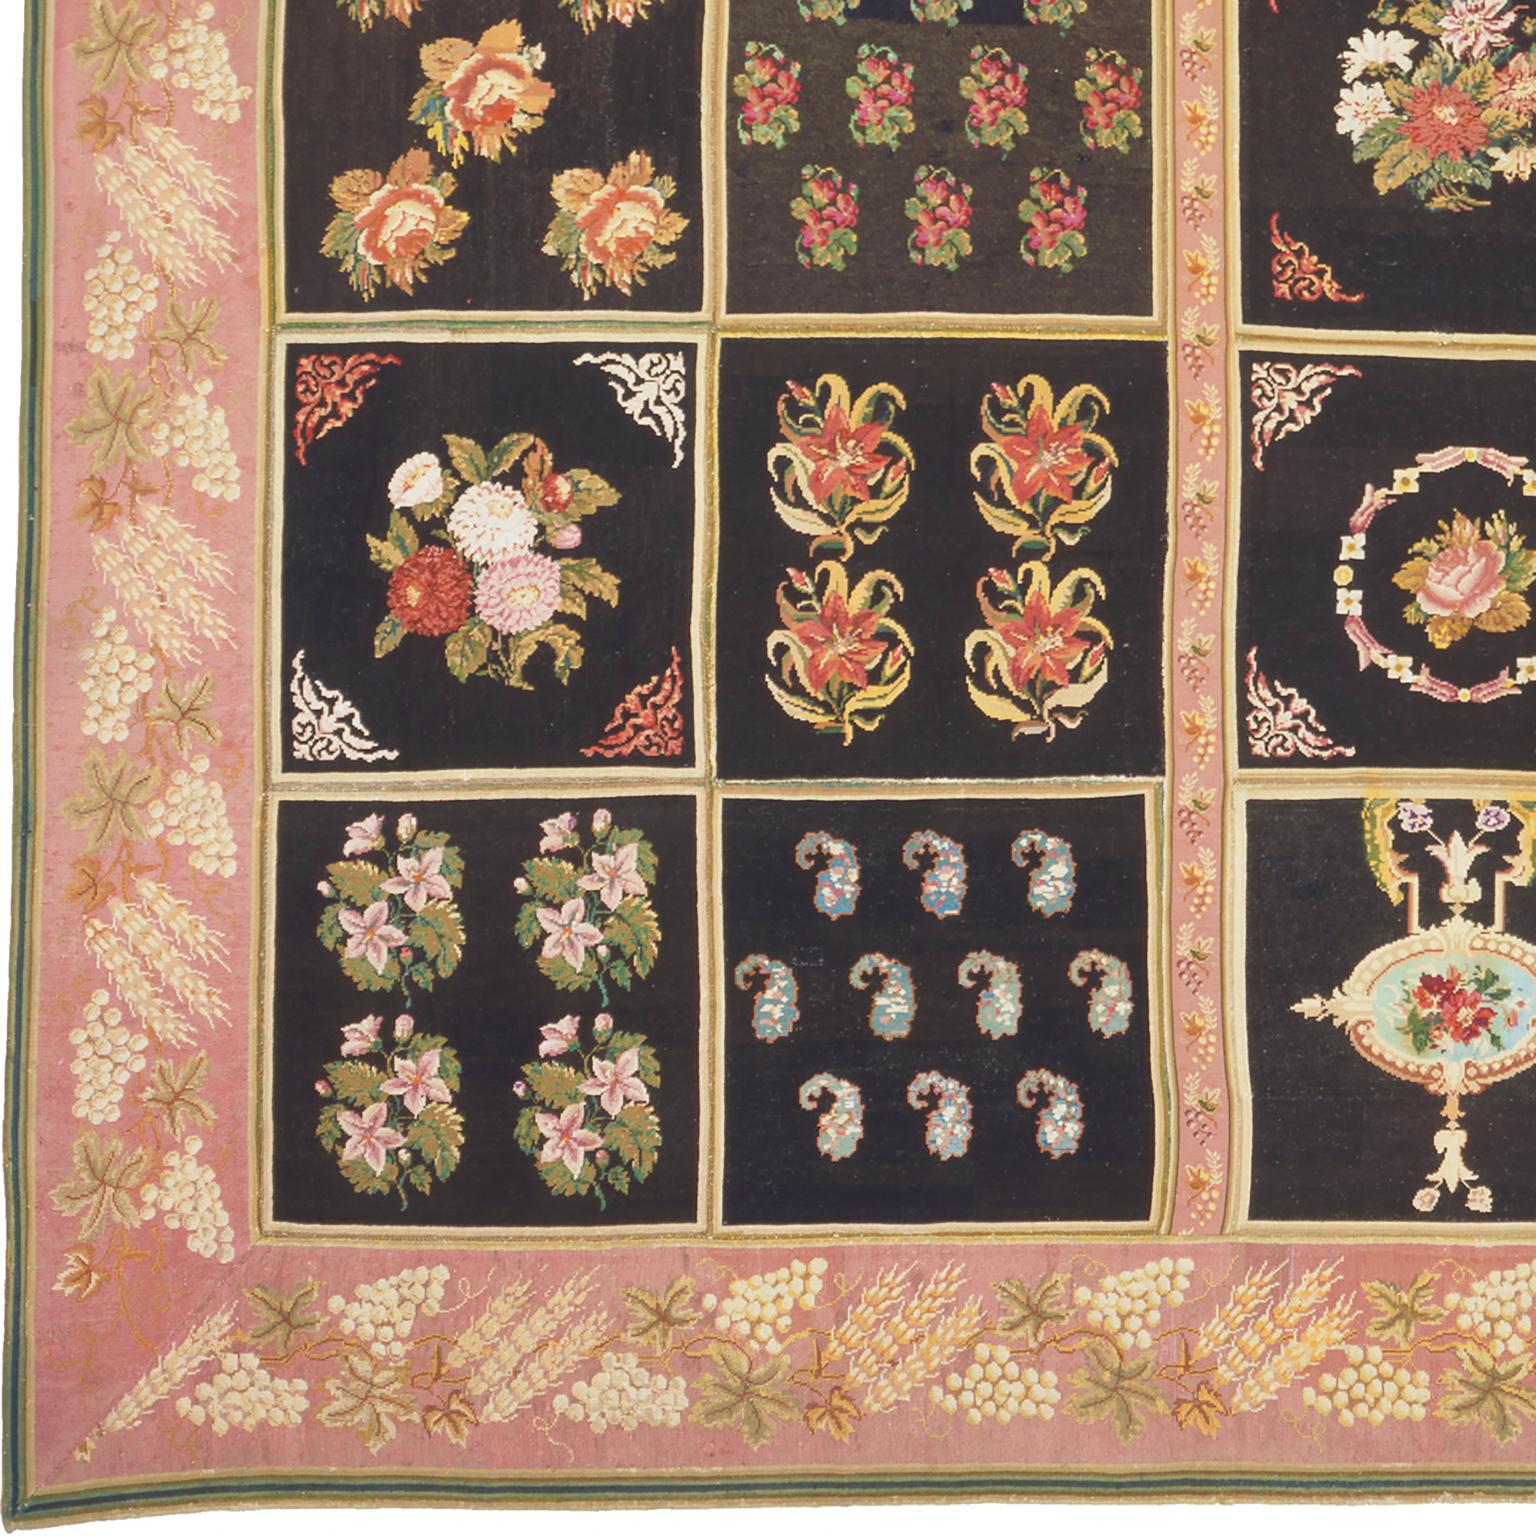 Mid-19th century English needlepoint carpet
England, circa 1870
Composed of 49 panels, each with a dark brown ground & varied floral motifs, enclosed by a liliac border of fruiting vines. Provenance; the Christopher Hodsoll Collection.
  